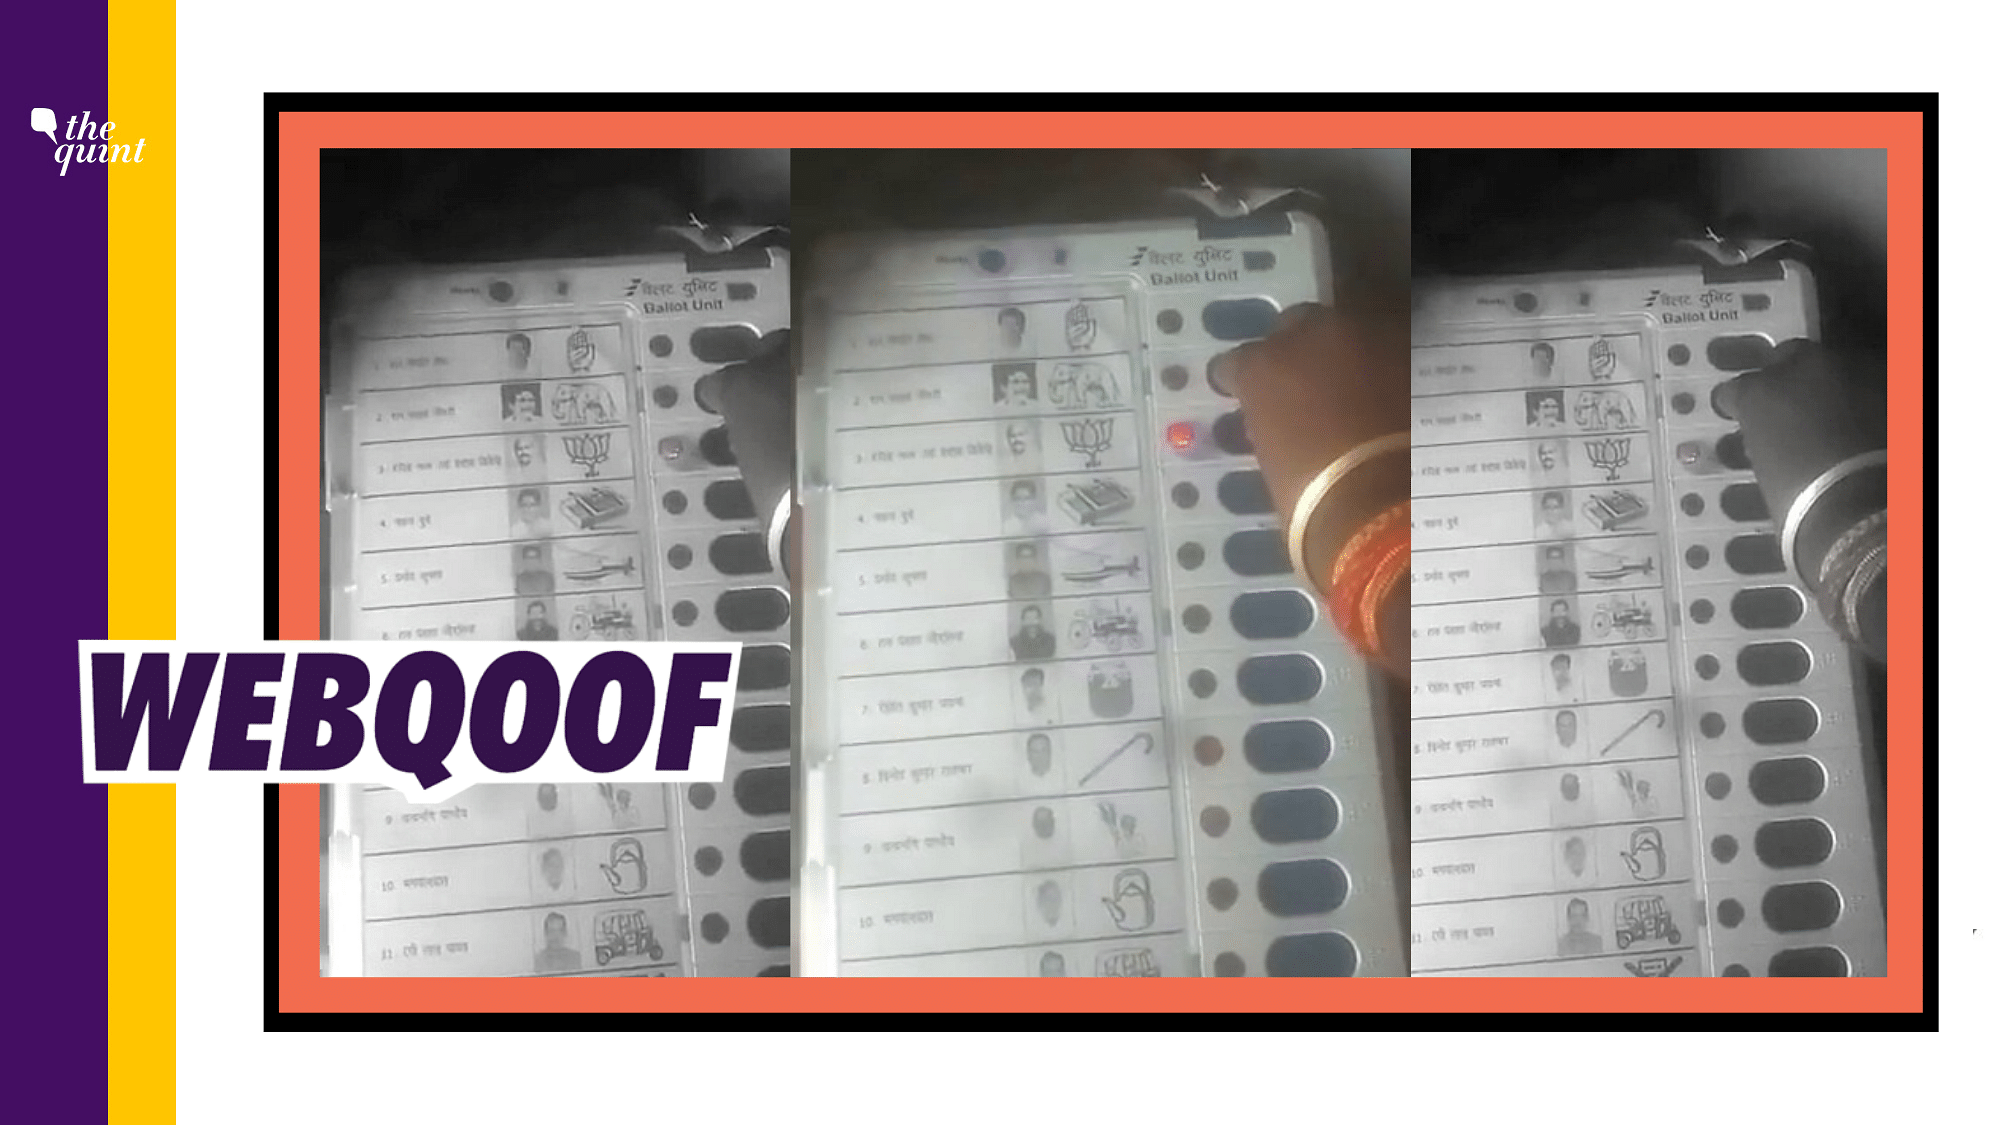 The video is however of the <a href="https://www.thequint.com/elections/election-results-key-takeaways-11-shocks-lok-sabha-pm-modi-bjp-wins-rahul-gandhi-congress">2019 Lok Sabha elections</a>, from the Basti constituency in Uttar Pradesh.